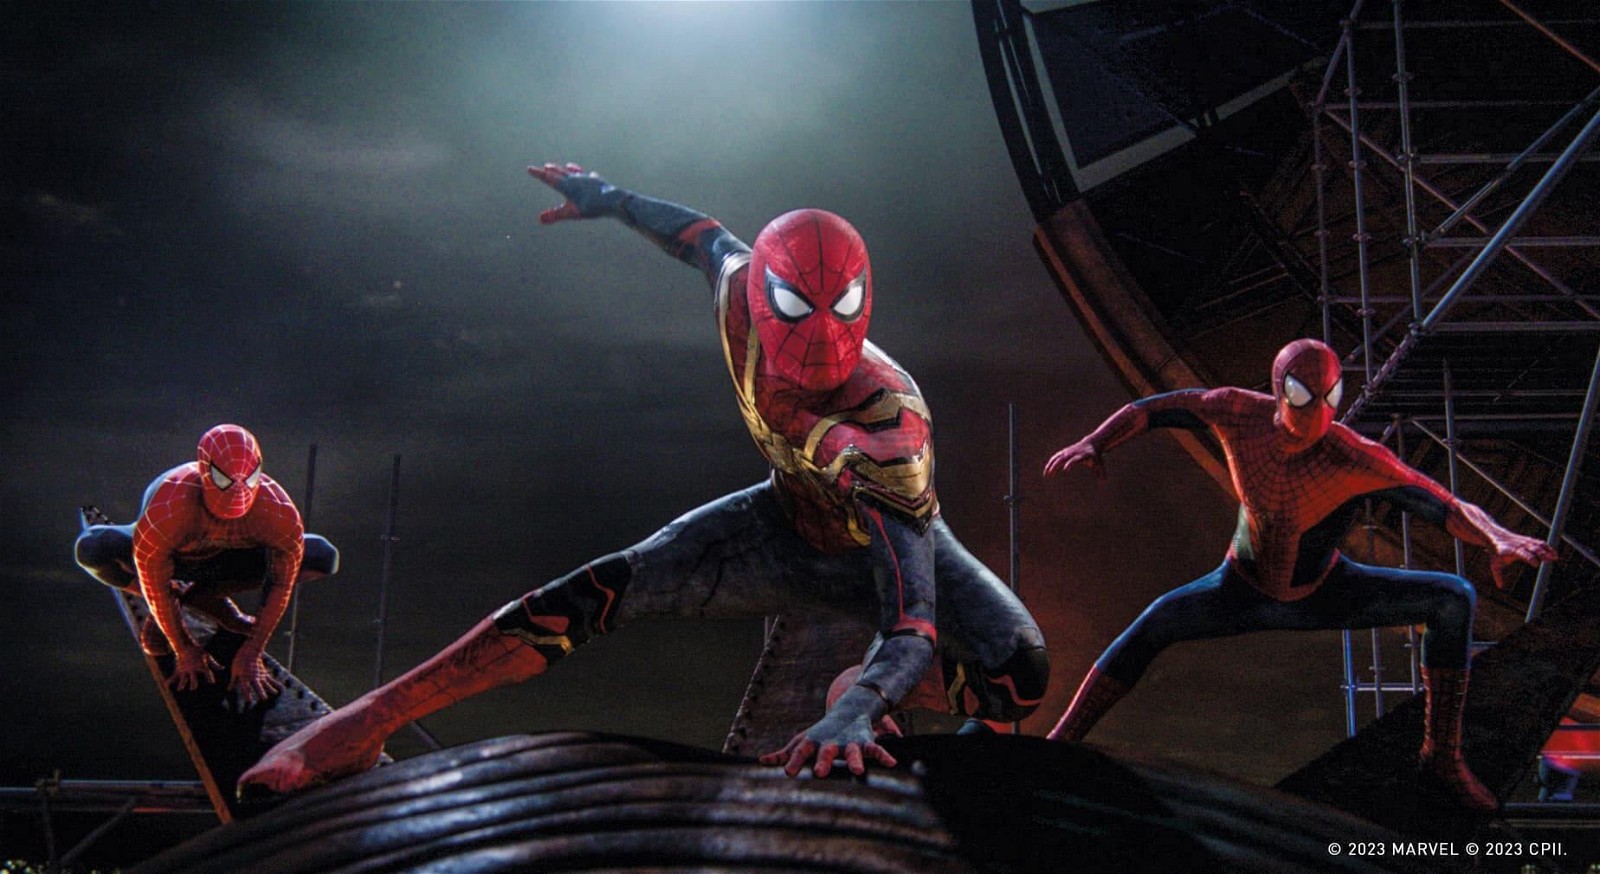 Spider-Man 4 with Tom Holland confirmed: Kevin Feige Announces